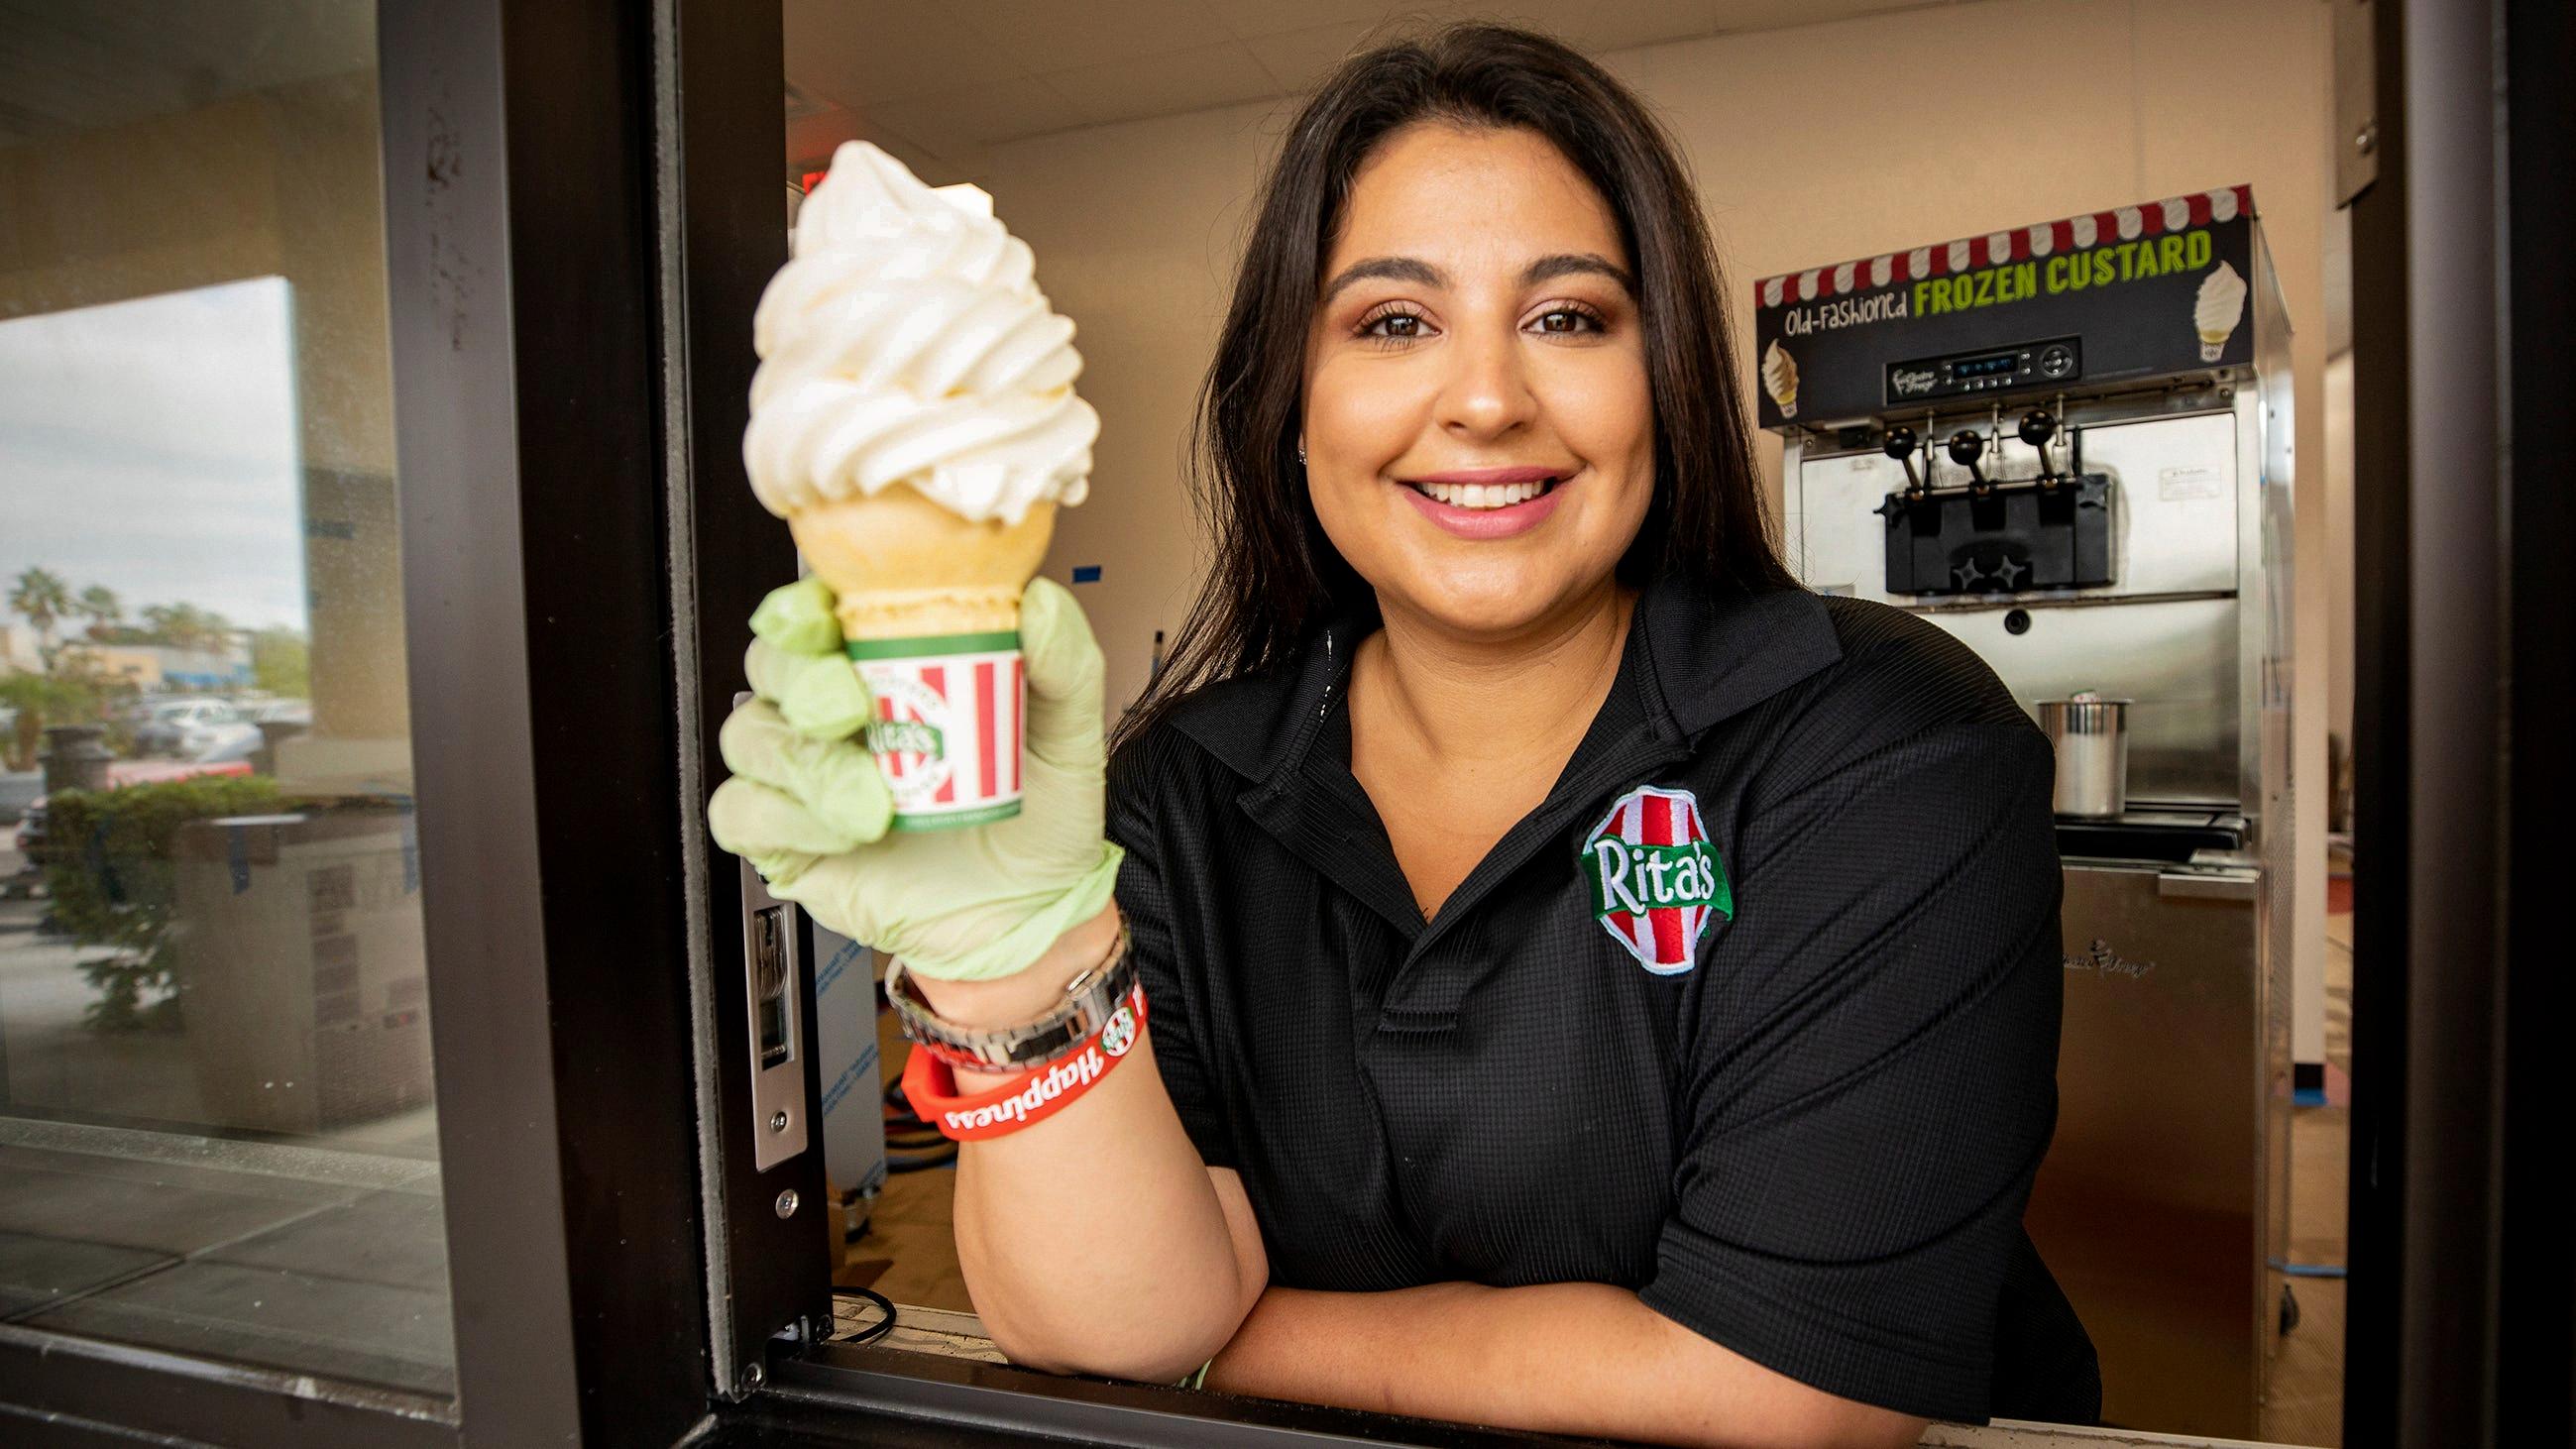 Get Your Rita's Frozen Treat Before the Season Ends